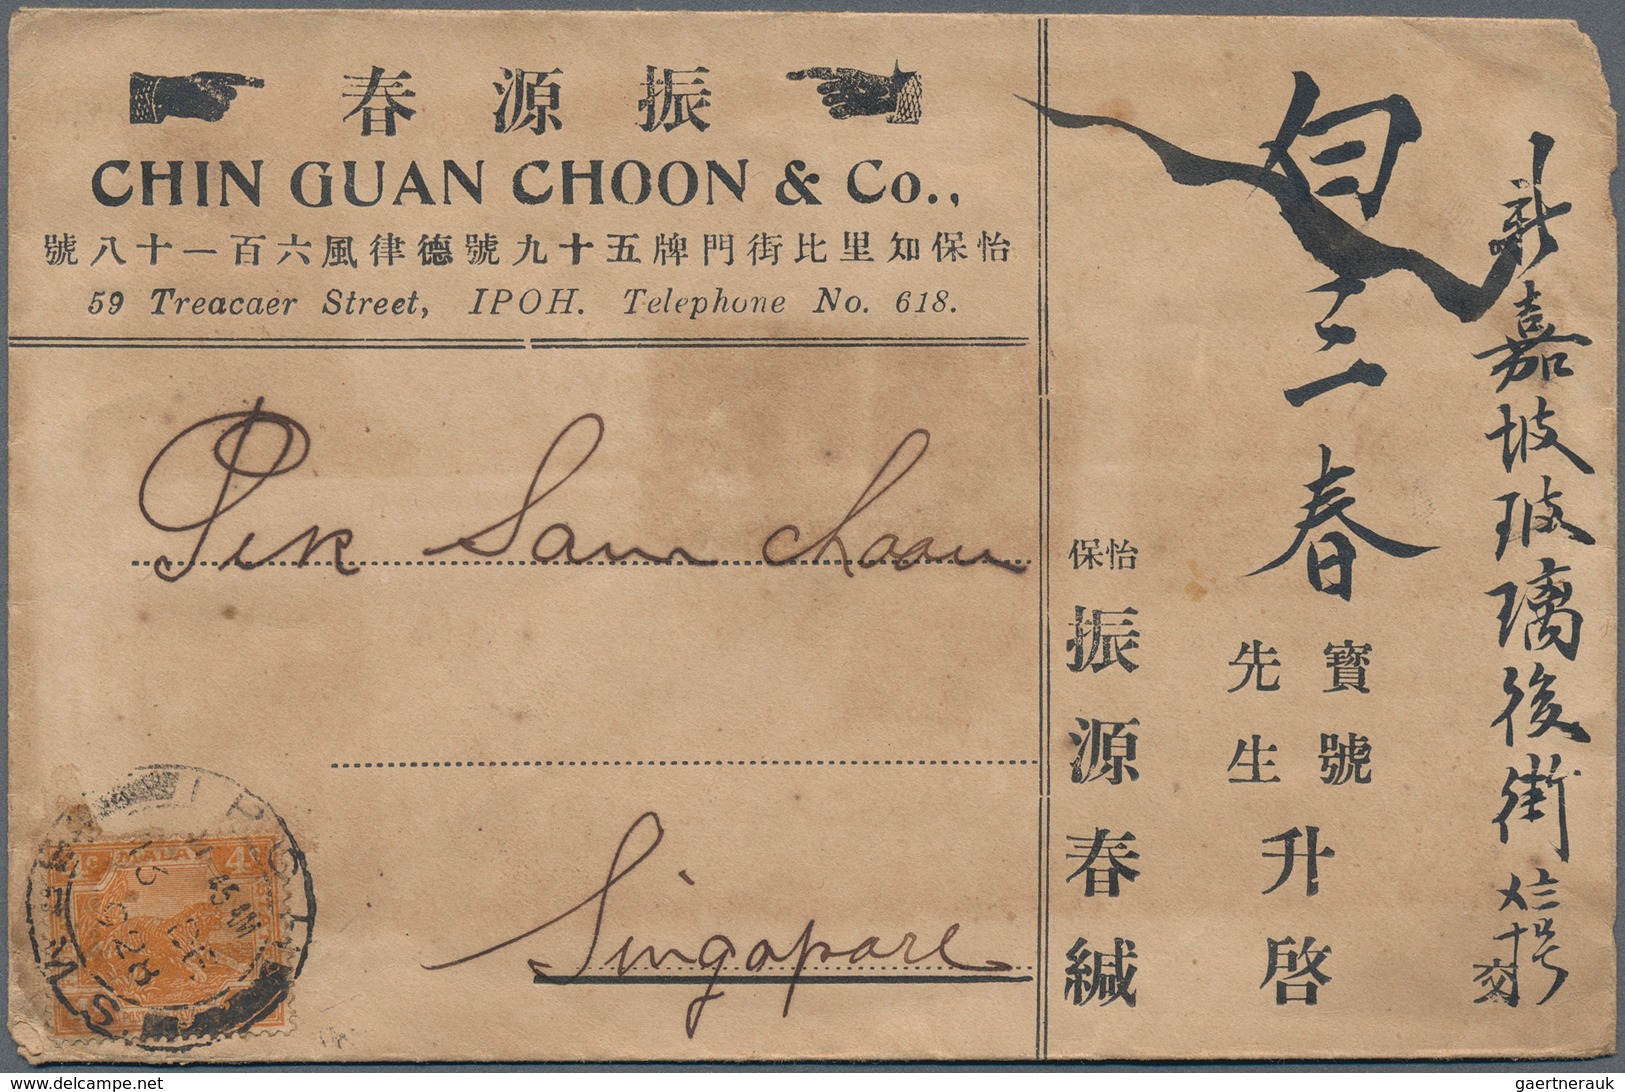 24052 Singapur: 1910's-20's: About 100 covers and documents, from Singapore mostly, with telegrams, invoic